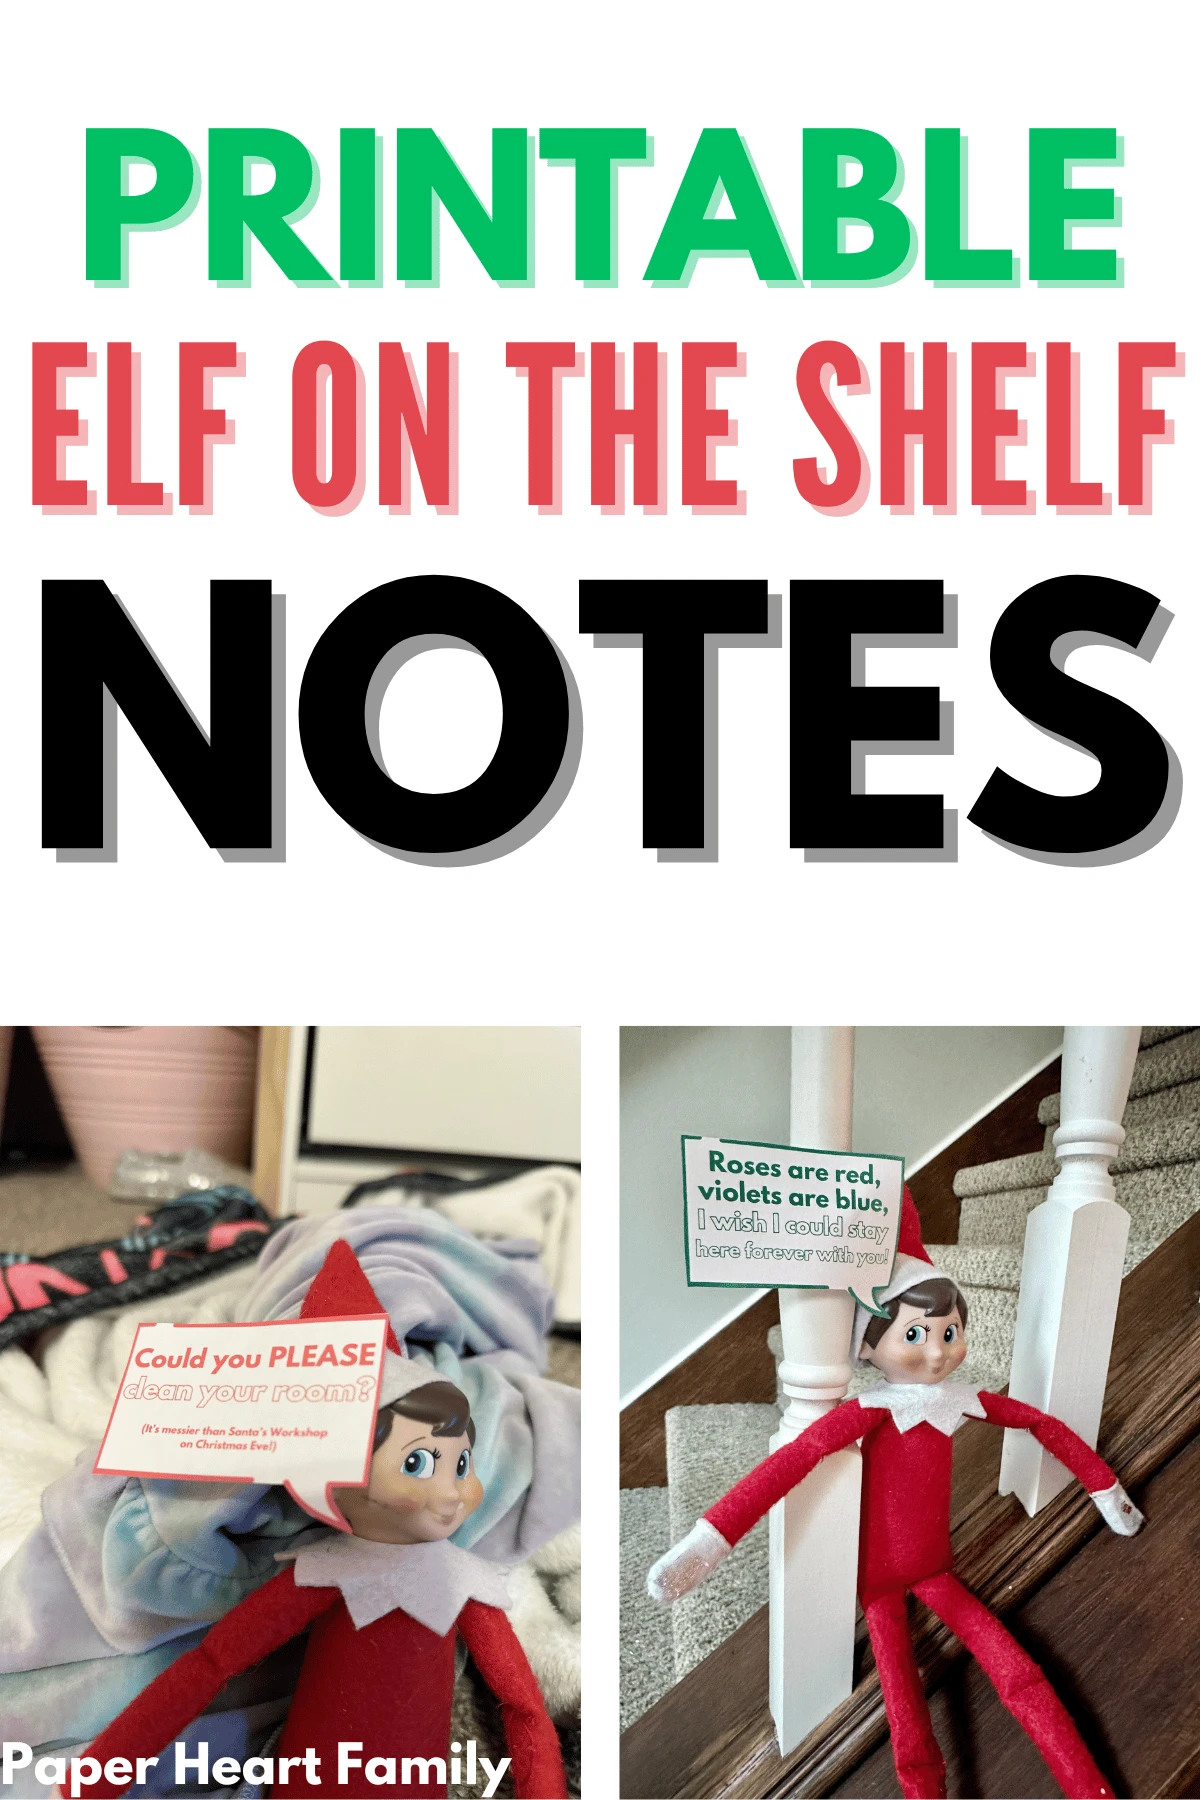 Elf on the Shelf thought bubbles that say "Could you please clean your room?" and "Roses are red, violets are blue, I wish I could stay here forever with you!"